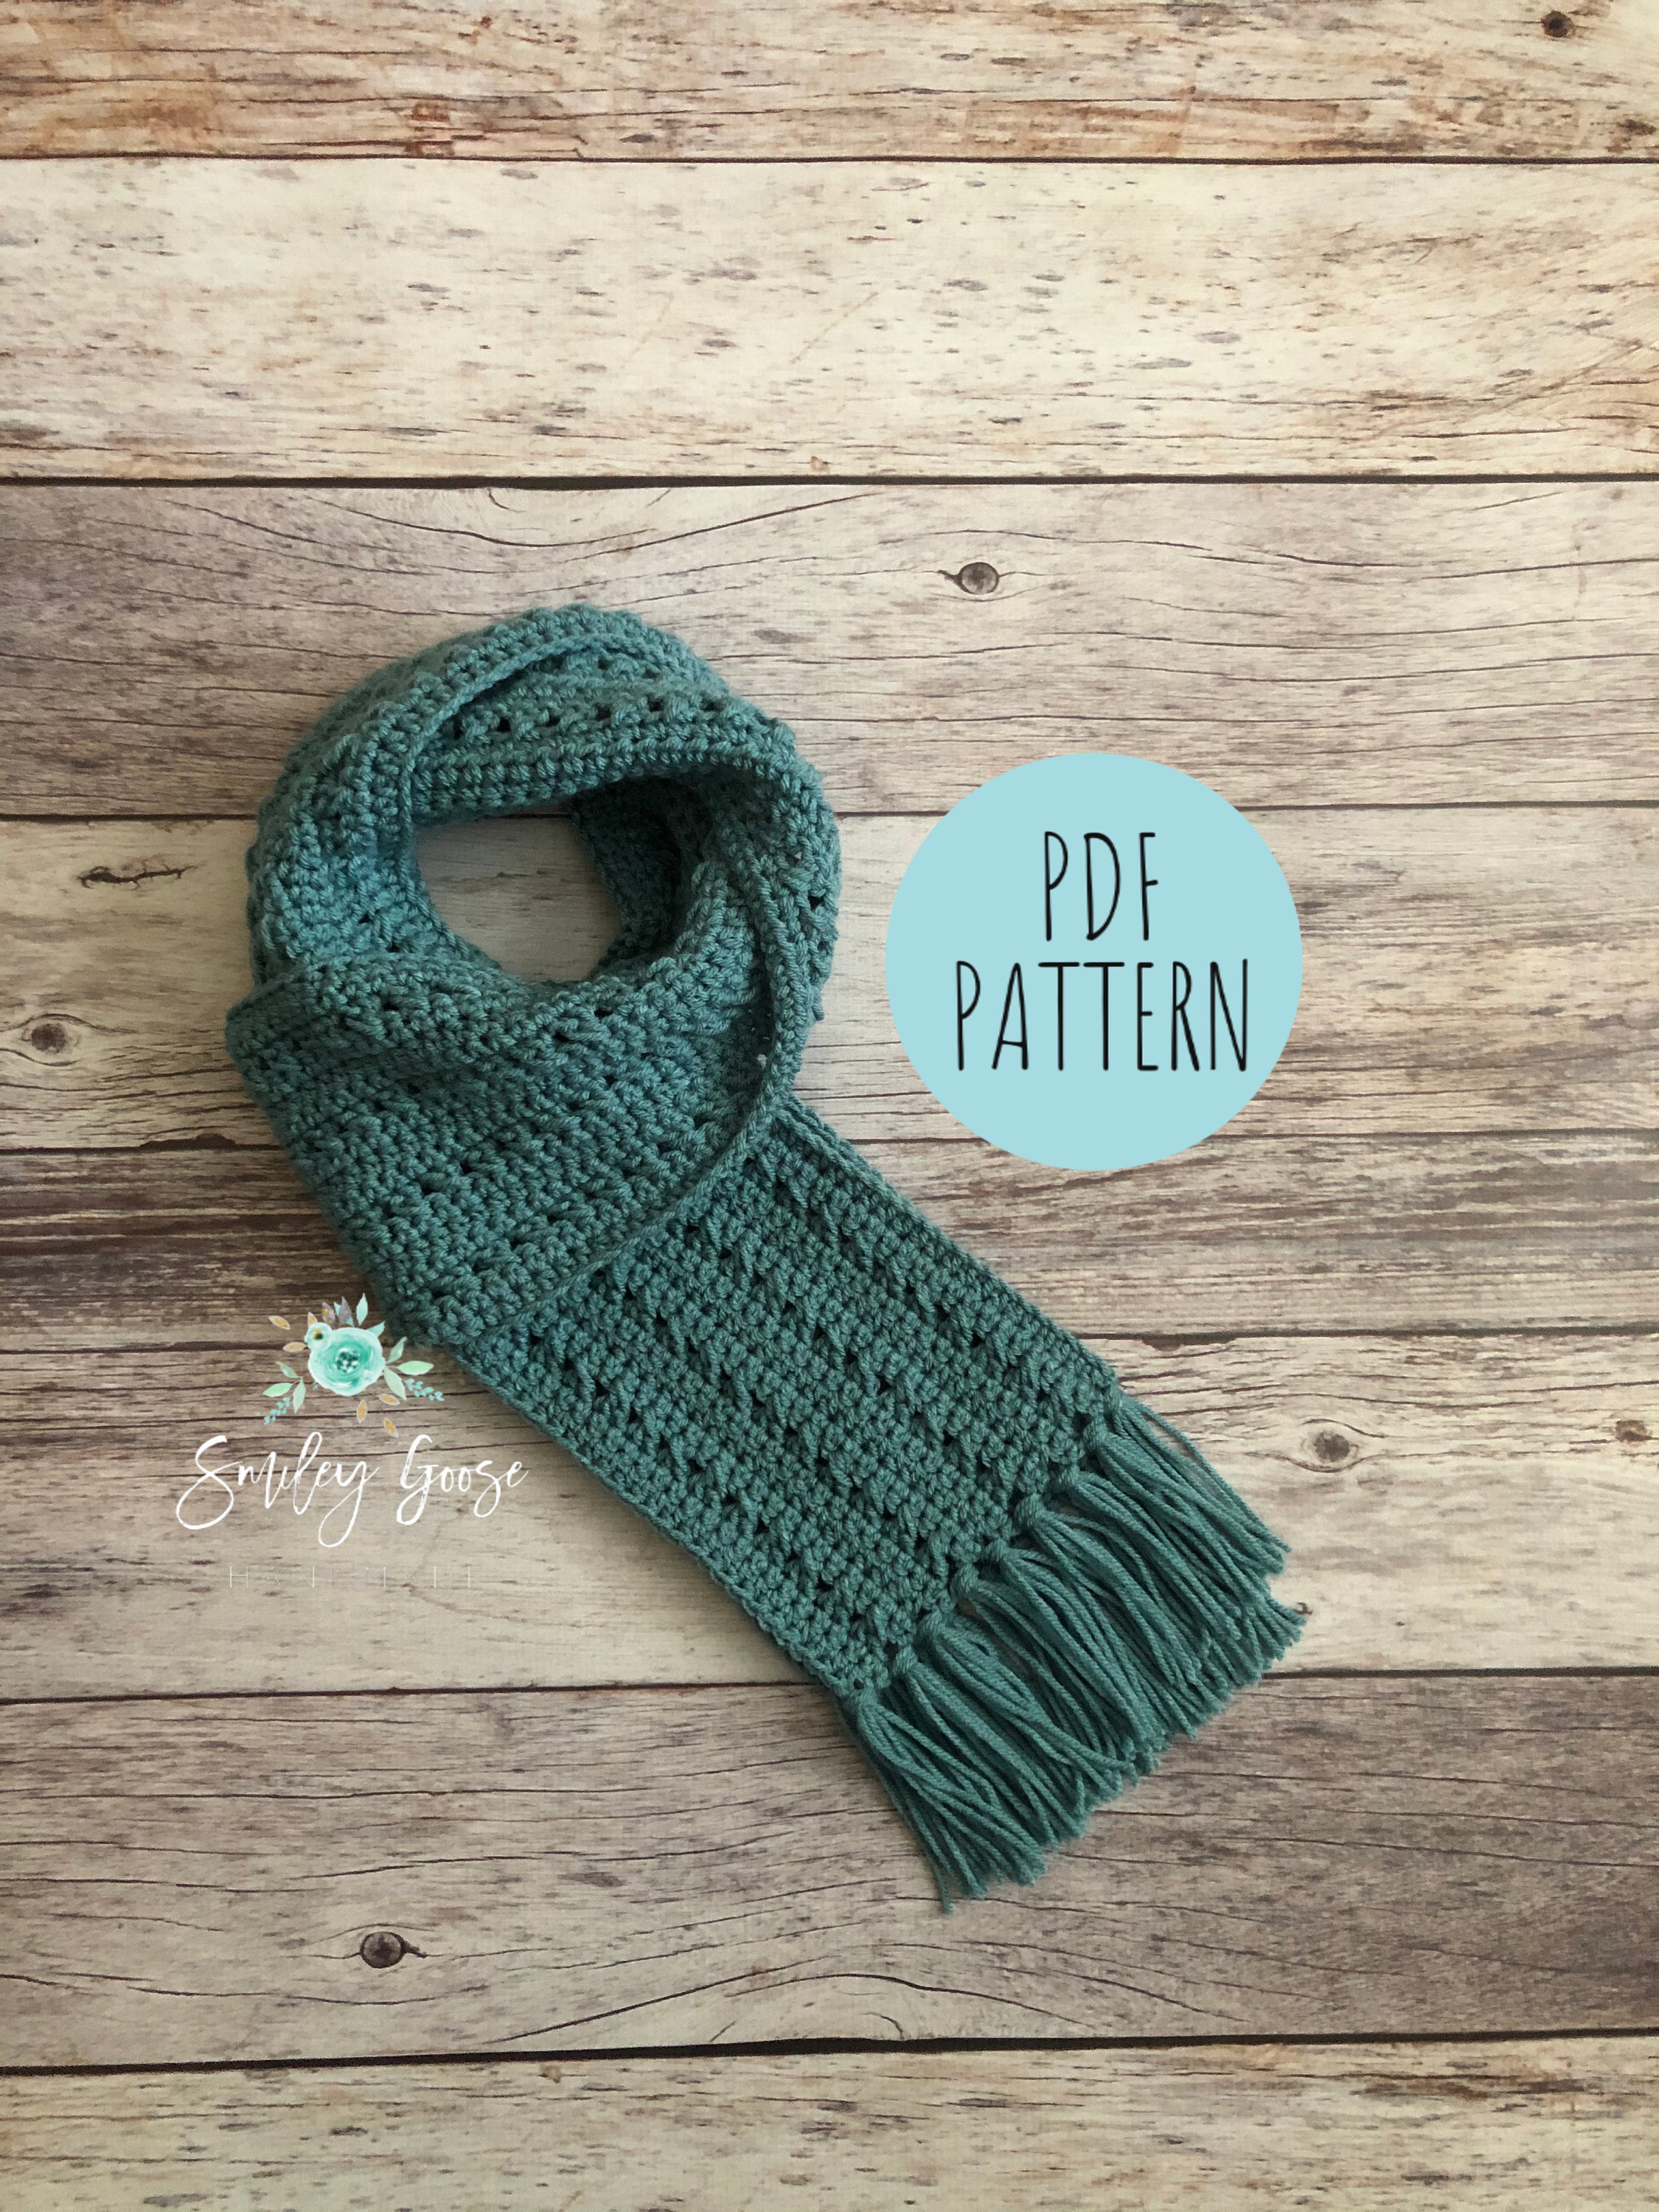 Working on a super fun new scarf pattern from the Make This beginner h, Crochet Scarf